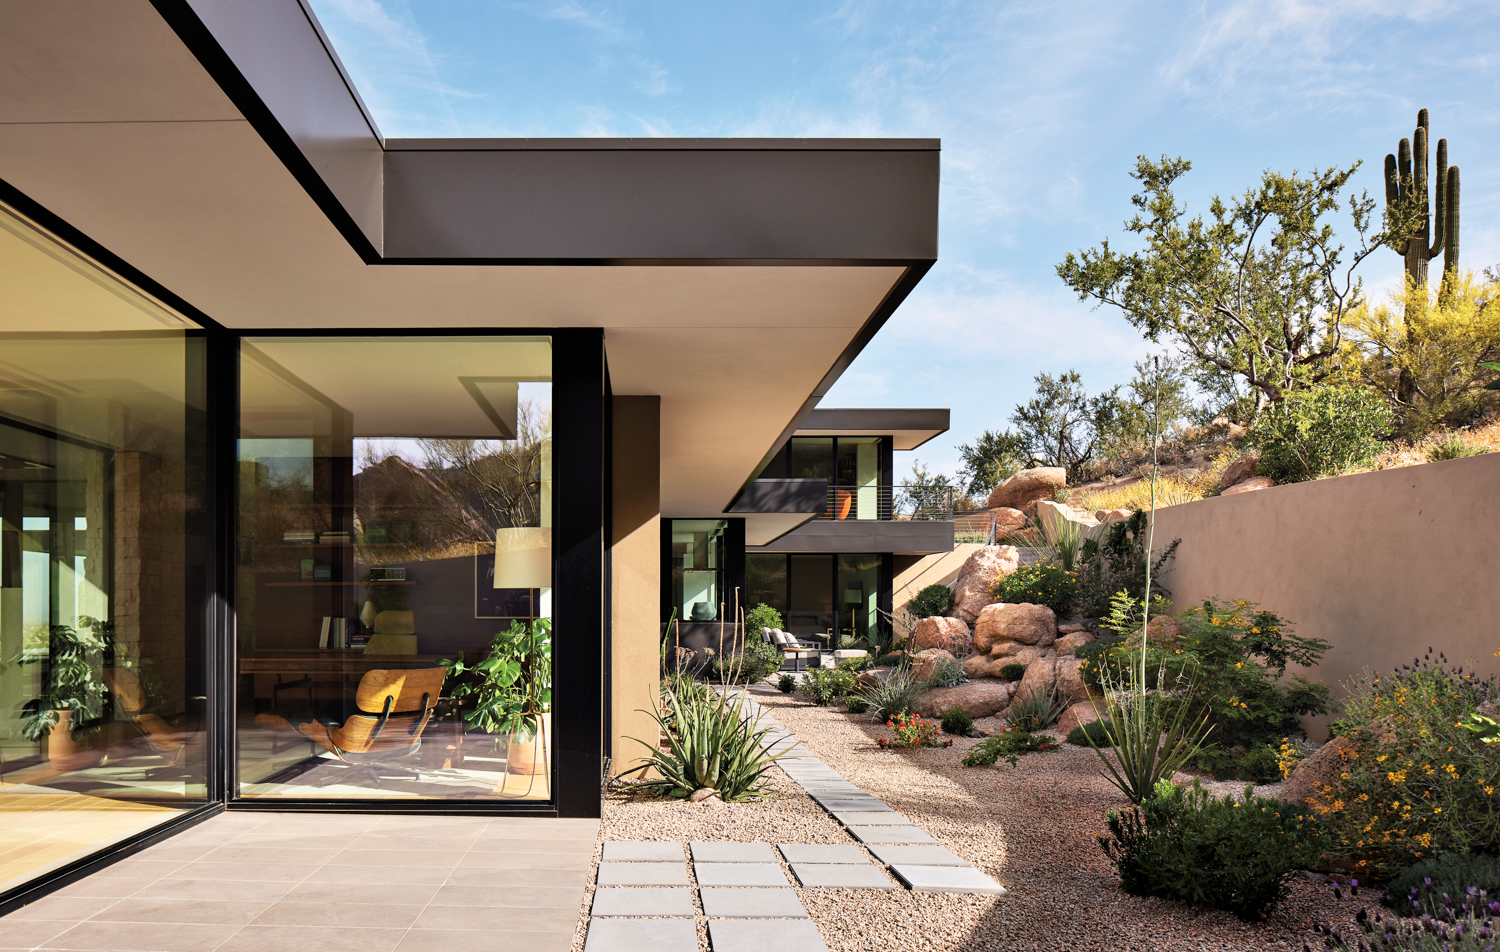 See How This Midcentury Home Embraces The Arizona Desert Landscape